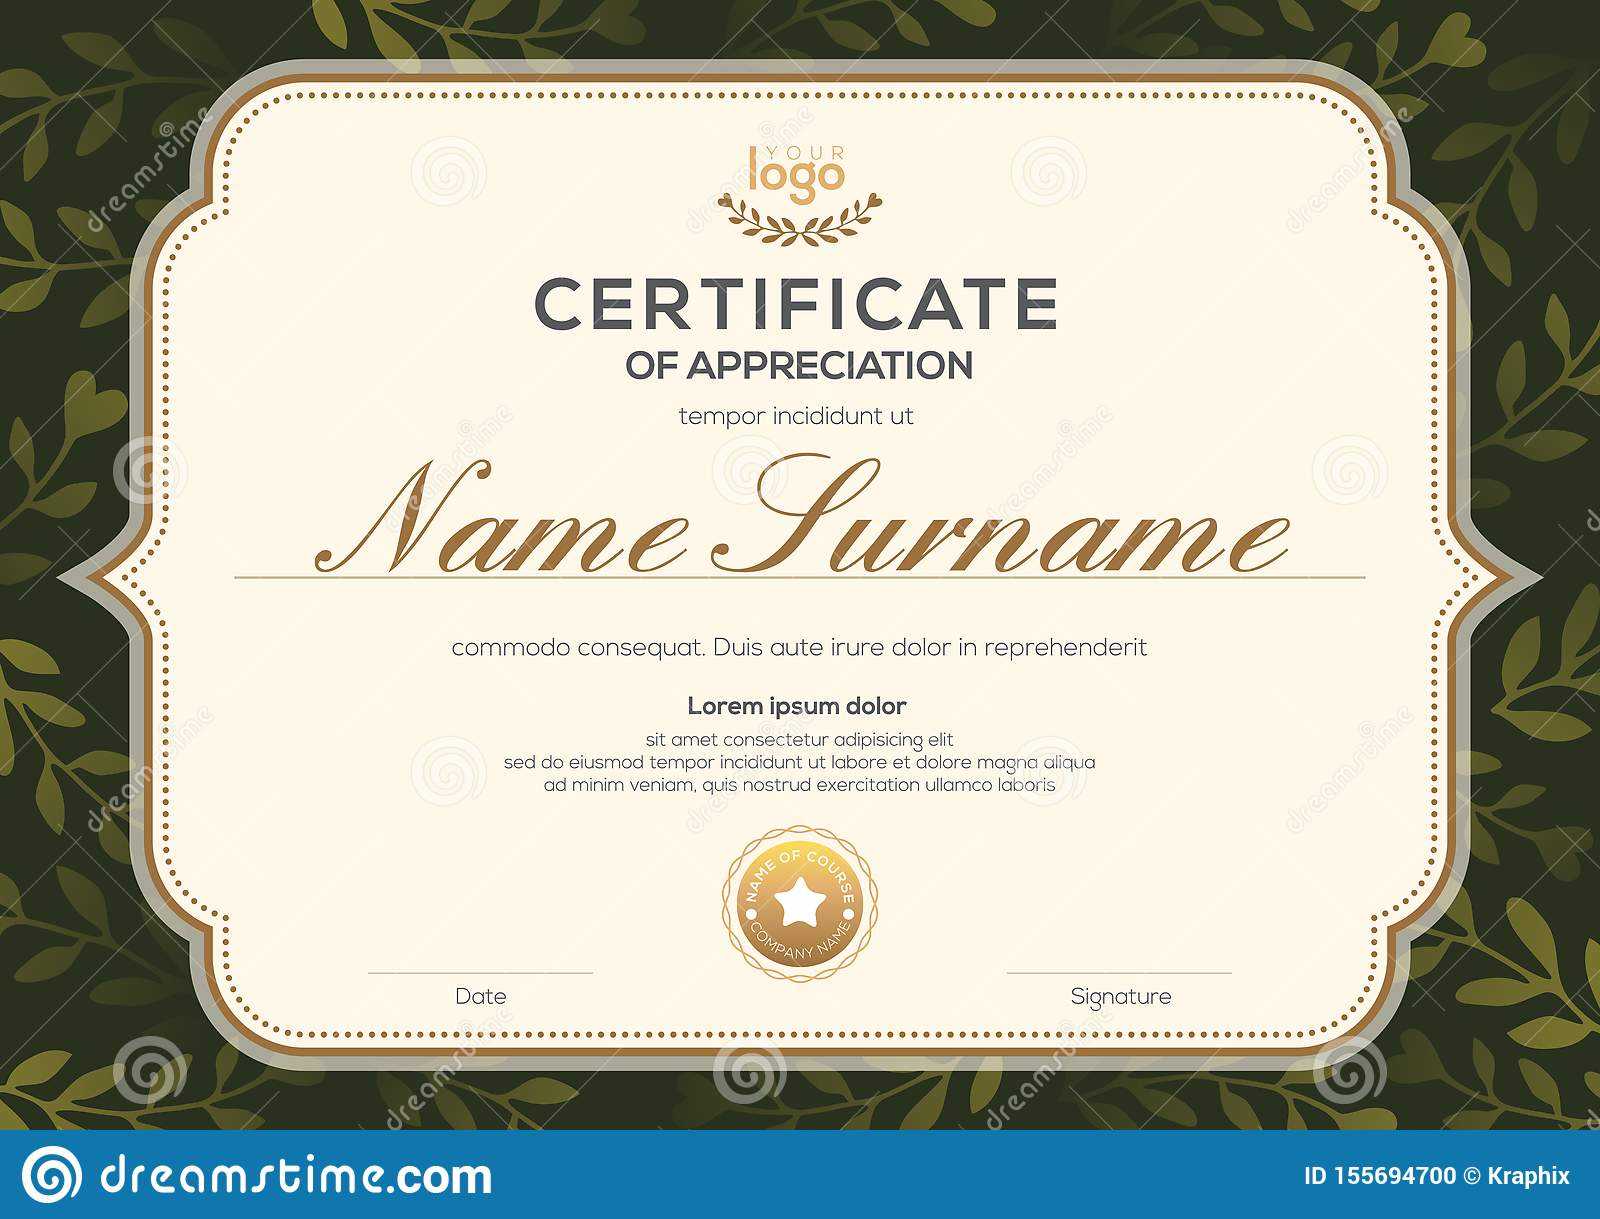 Certificate Template With Vintage Frame On Dark Green Floral Throughout Commemorative Certificate Template